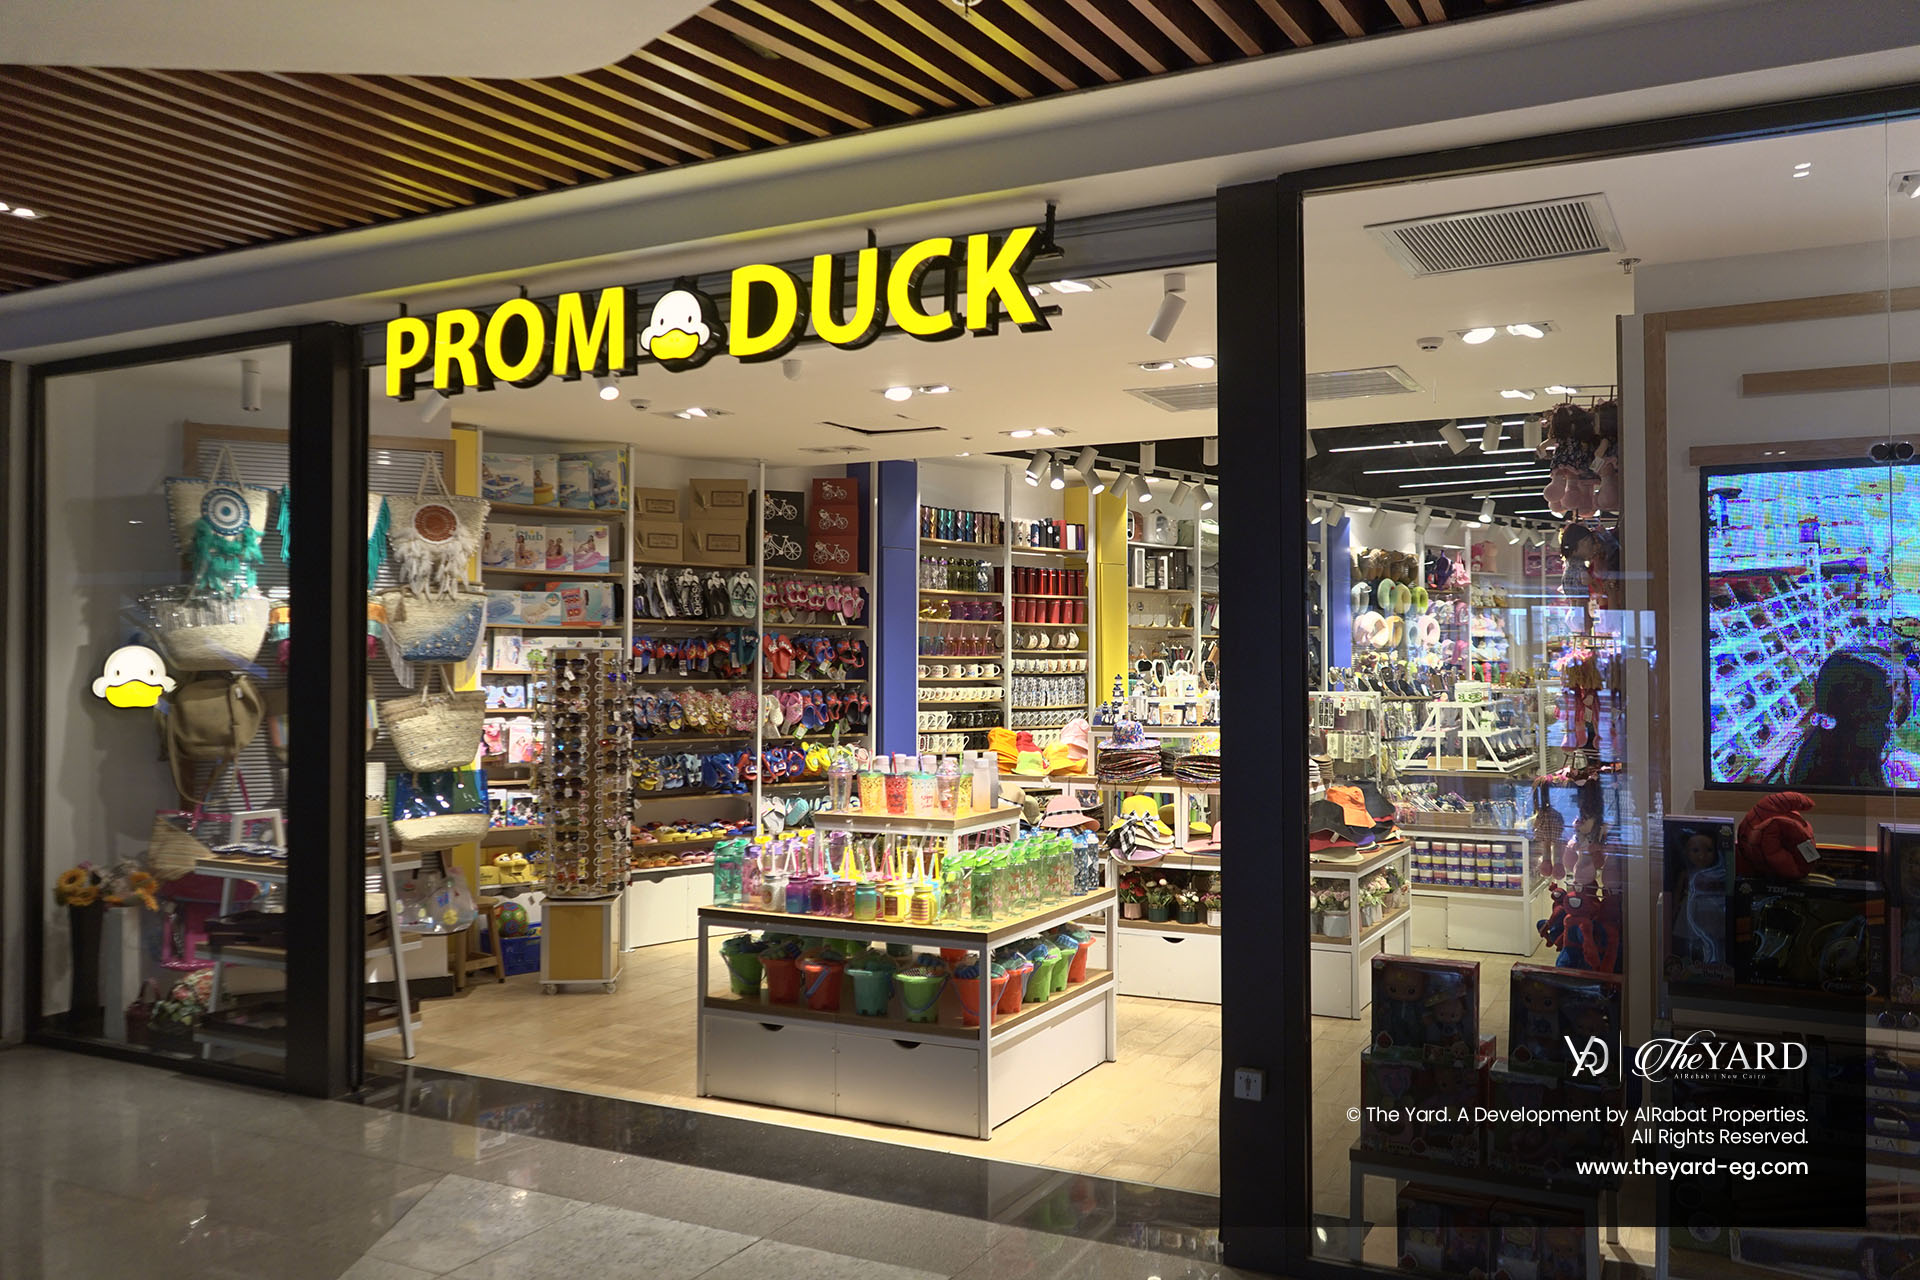 The-Yard-Promoduck-01